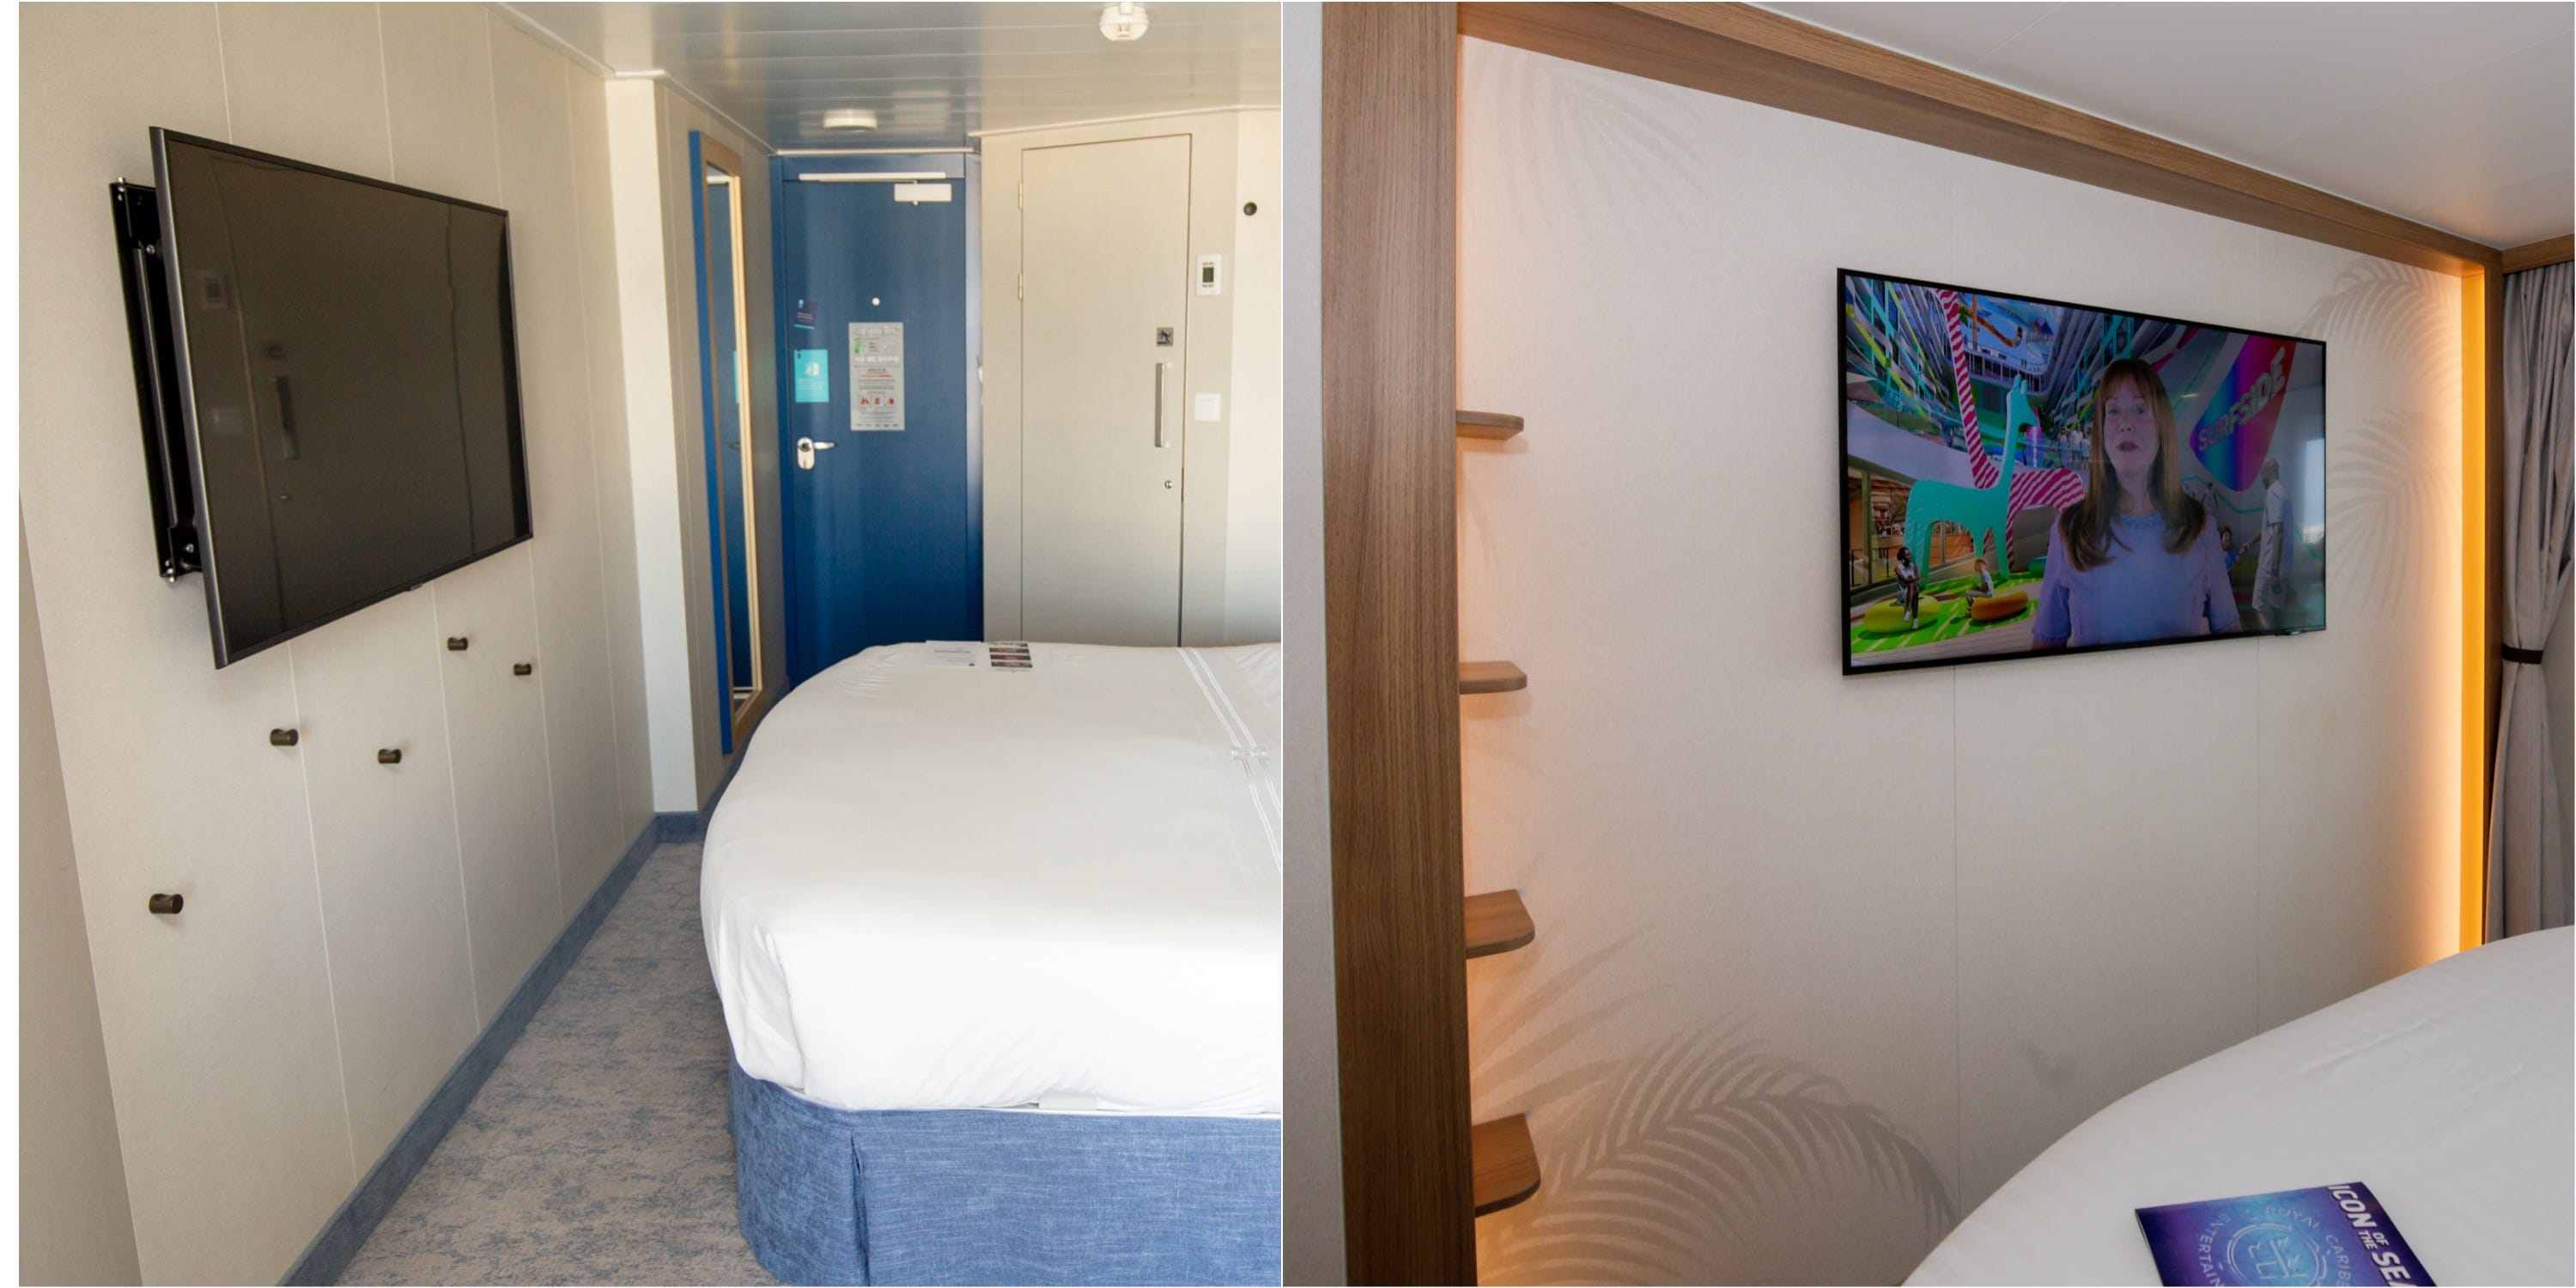 <p>And both were flanked by light fixtures with built-in USB outlets, as is expected on most modern cruise ships.</p><p>The cruise line says the ships' balcony cabins use two twin mattresses that have been "converted" to make a king bed. It's a common practice I've never had an issue with — until Icon.</p>